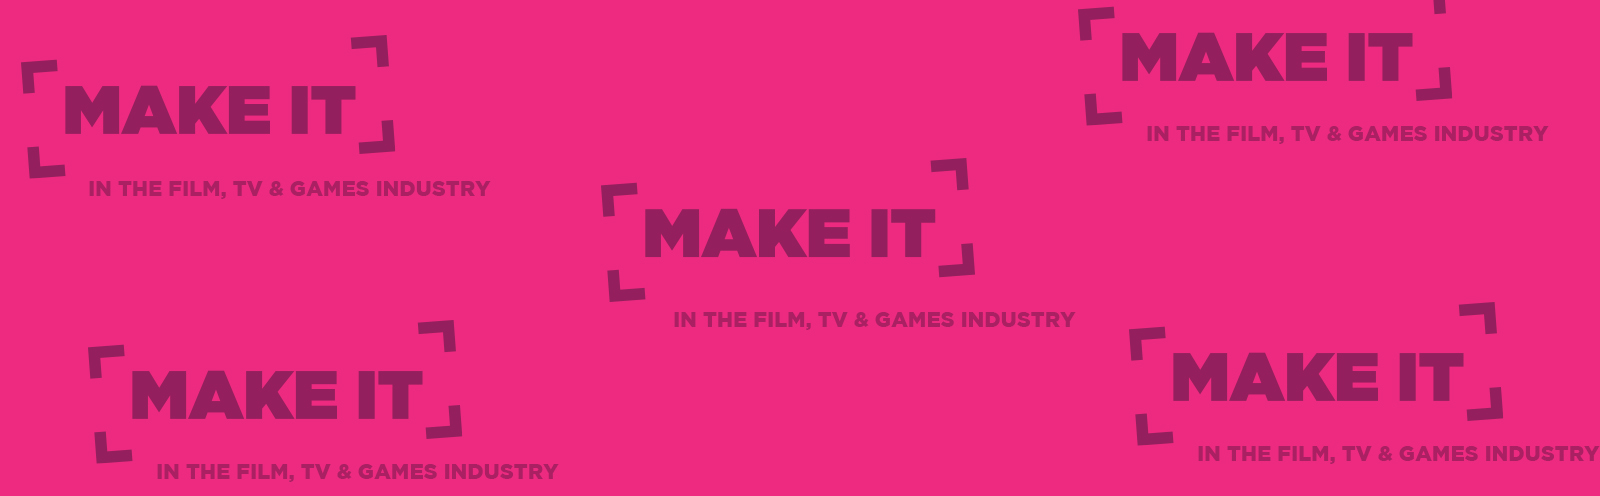 Make it in the film, TV and games industry banner